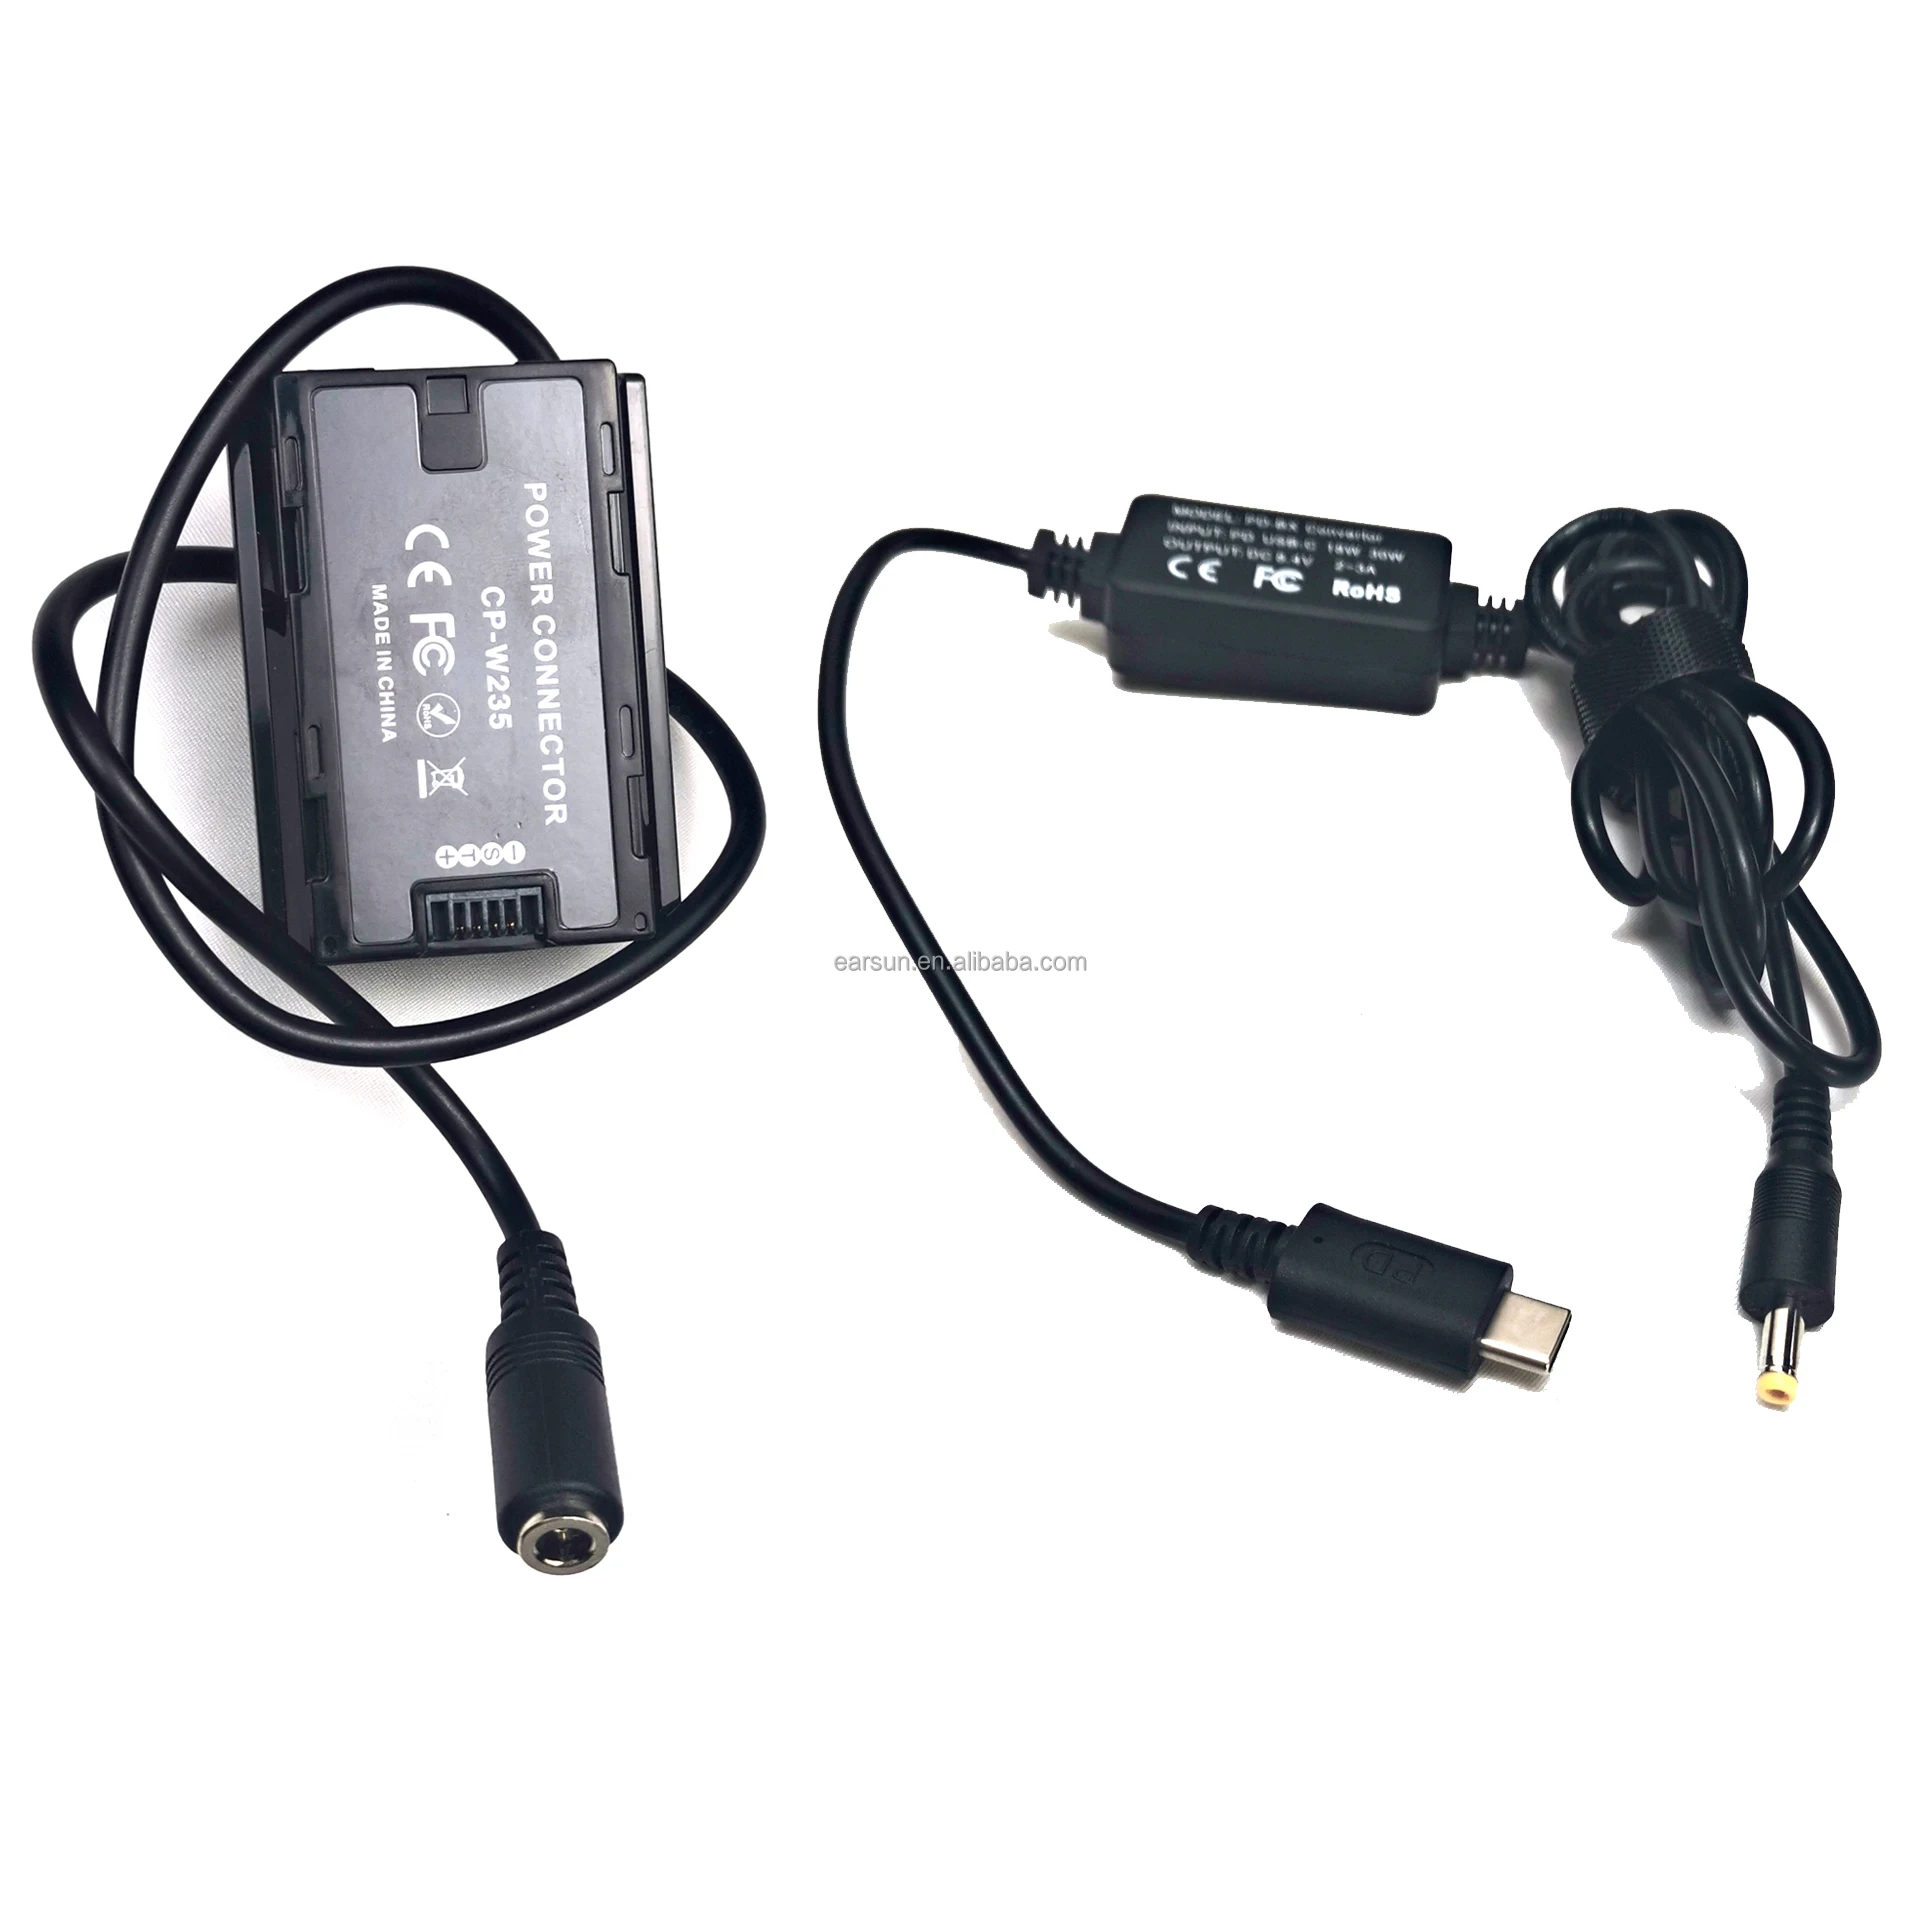 

Free shipping CP-W235 DC Coupler + PD-BX Convertor USB Power AC Adpater kit Replacement for Fujifilm X-T4, VG-XT4 Camera., Black